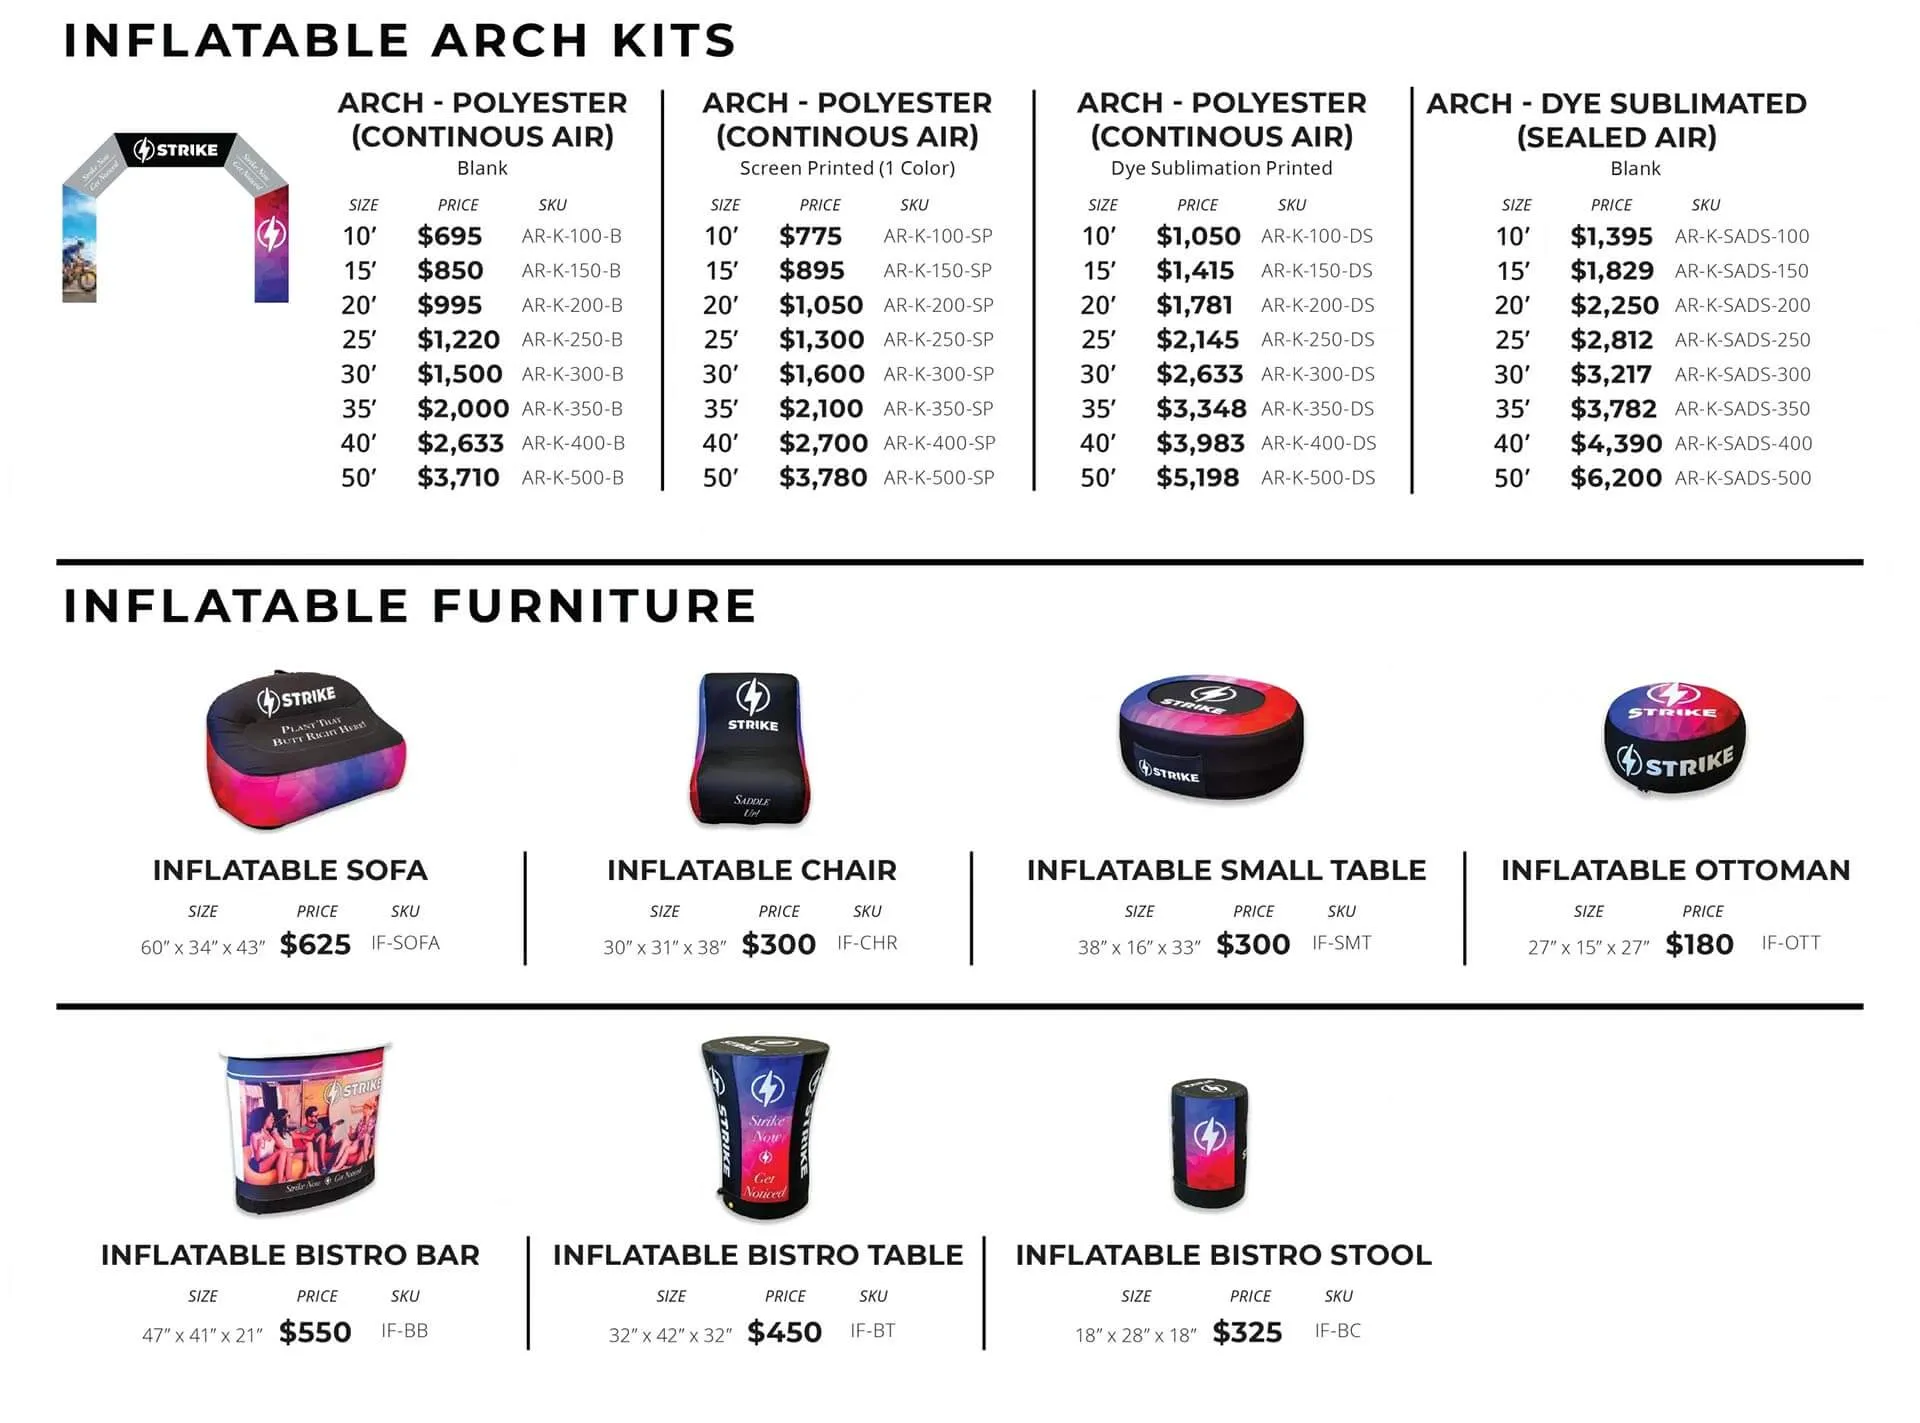 resellers pricing guide for inflatable arch kits inflatable furniture